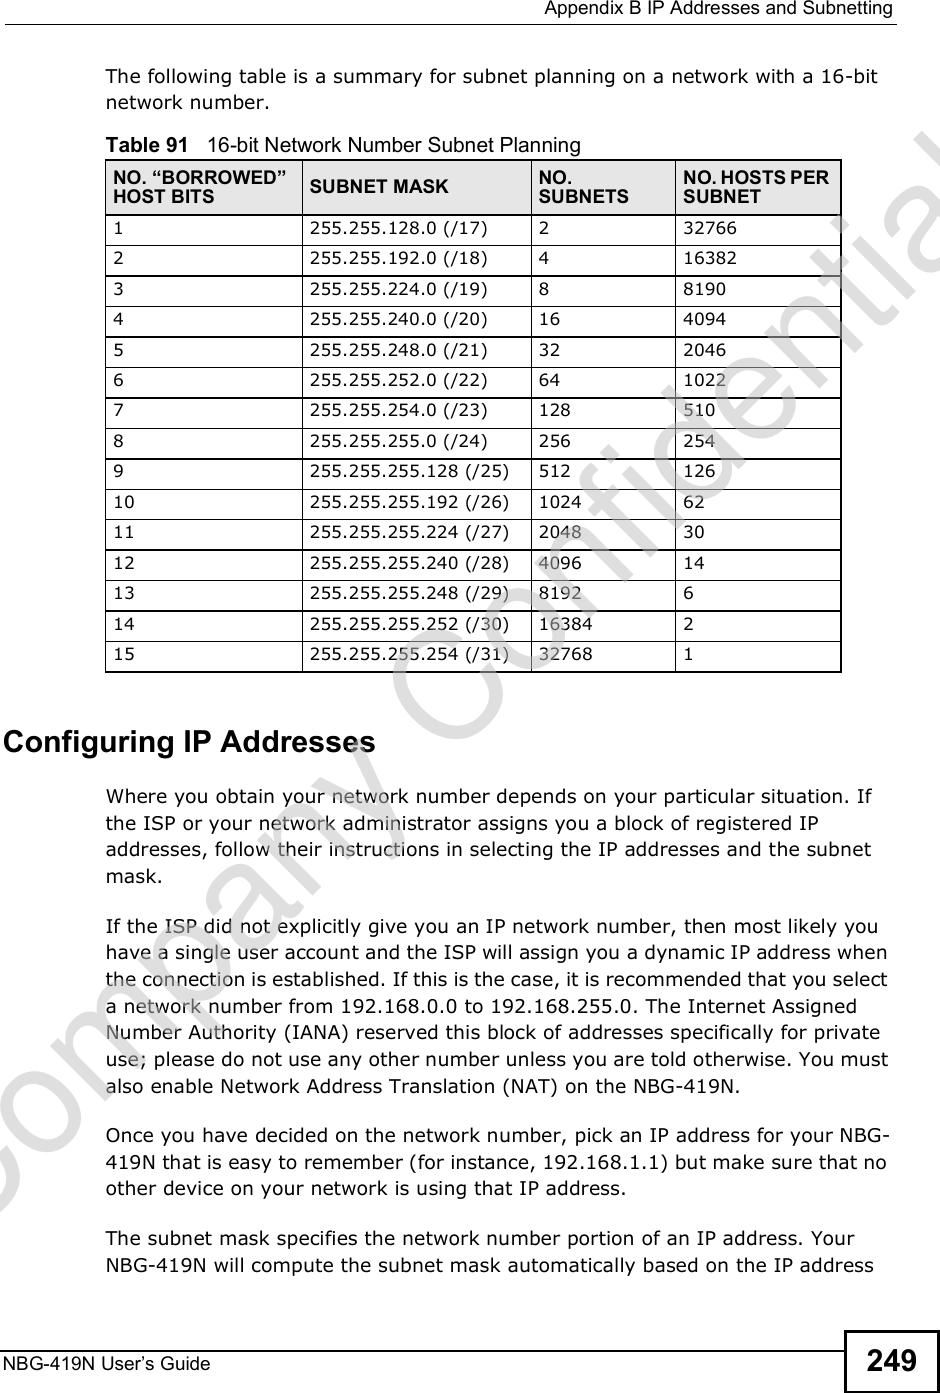  Appendix BIP Addresses and SubnettingNBG-419N User s Guide 249The following table is a summary for subnet planning on a network with a 16-bit network number. Configuring IP AddressesWhere you obtain your network number depends on your particular situation. If the ISP or your network administrator assigns you a block of registered IP addresses, follow their instructions in selecting the IP addresses and the subnet mask.If the ISP did not explicitly give you an IP network number, then most likely you have a single user account and the ISP will assign you a dynamic IP address when the connection is established. If this is the case, it is recommended that you select a network number from 192.168.0.0 to 192.168.255.0. The Internet Assigned Number Authority (IANA) reserved this block of addresses specifically for private use; please do not use any other number unless you are told otherwise. You must also enable Network Address Translation (NAT) on the NBG-419N. Once you have decided on the network number, pick an IP address for your NBG-419N that is easy to remember (for instance, 192.168.1.1) but make sure that no other device on your network is using that IP address.The subnet mask specifies the network number portion of an IP address. Your NBG-419N will compute the subnet mask automatically based on the IP address Table 91   16-bit Network Number Subnet PlanningNO. !BORROWED&quot; HOST BITS SUBNET MASK NO. SUBNETSNO. HOSTS PER SUBNET1255.255.128.0 (/17) 2 327662 255.255.192.0 (/18) 4 163823 255.255.224.0 (/19) 8 81904255.255.240.0 (/20) 16 40945255.255.248.0 (/21) 32 20466255.255.252.0 (/22) 64 10227255.255.254.0 (/23) 128 5108 255.255.255.0 (/24) 256 2549 255.255.255.128 (/25) 512 12610 255.255.255.192 (/26) 1024 6211 255.255.255.224 (/27) 2048 3012 255.255.255.240 (/28) 4096 1413 255.255.255.248 (/29) 8192 614 255.255.255.252 (/30) 16384 215 255.255.255.254 (/31) 32768 1Company Confidential